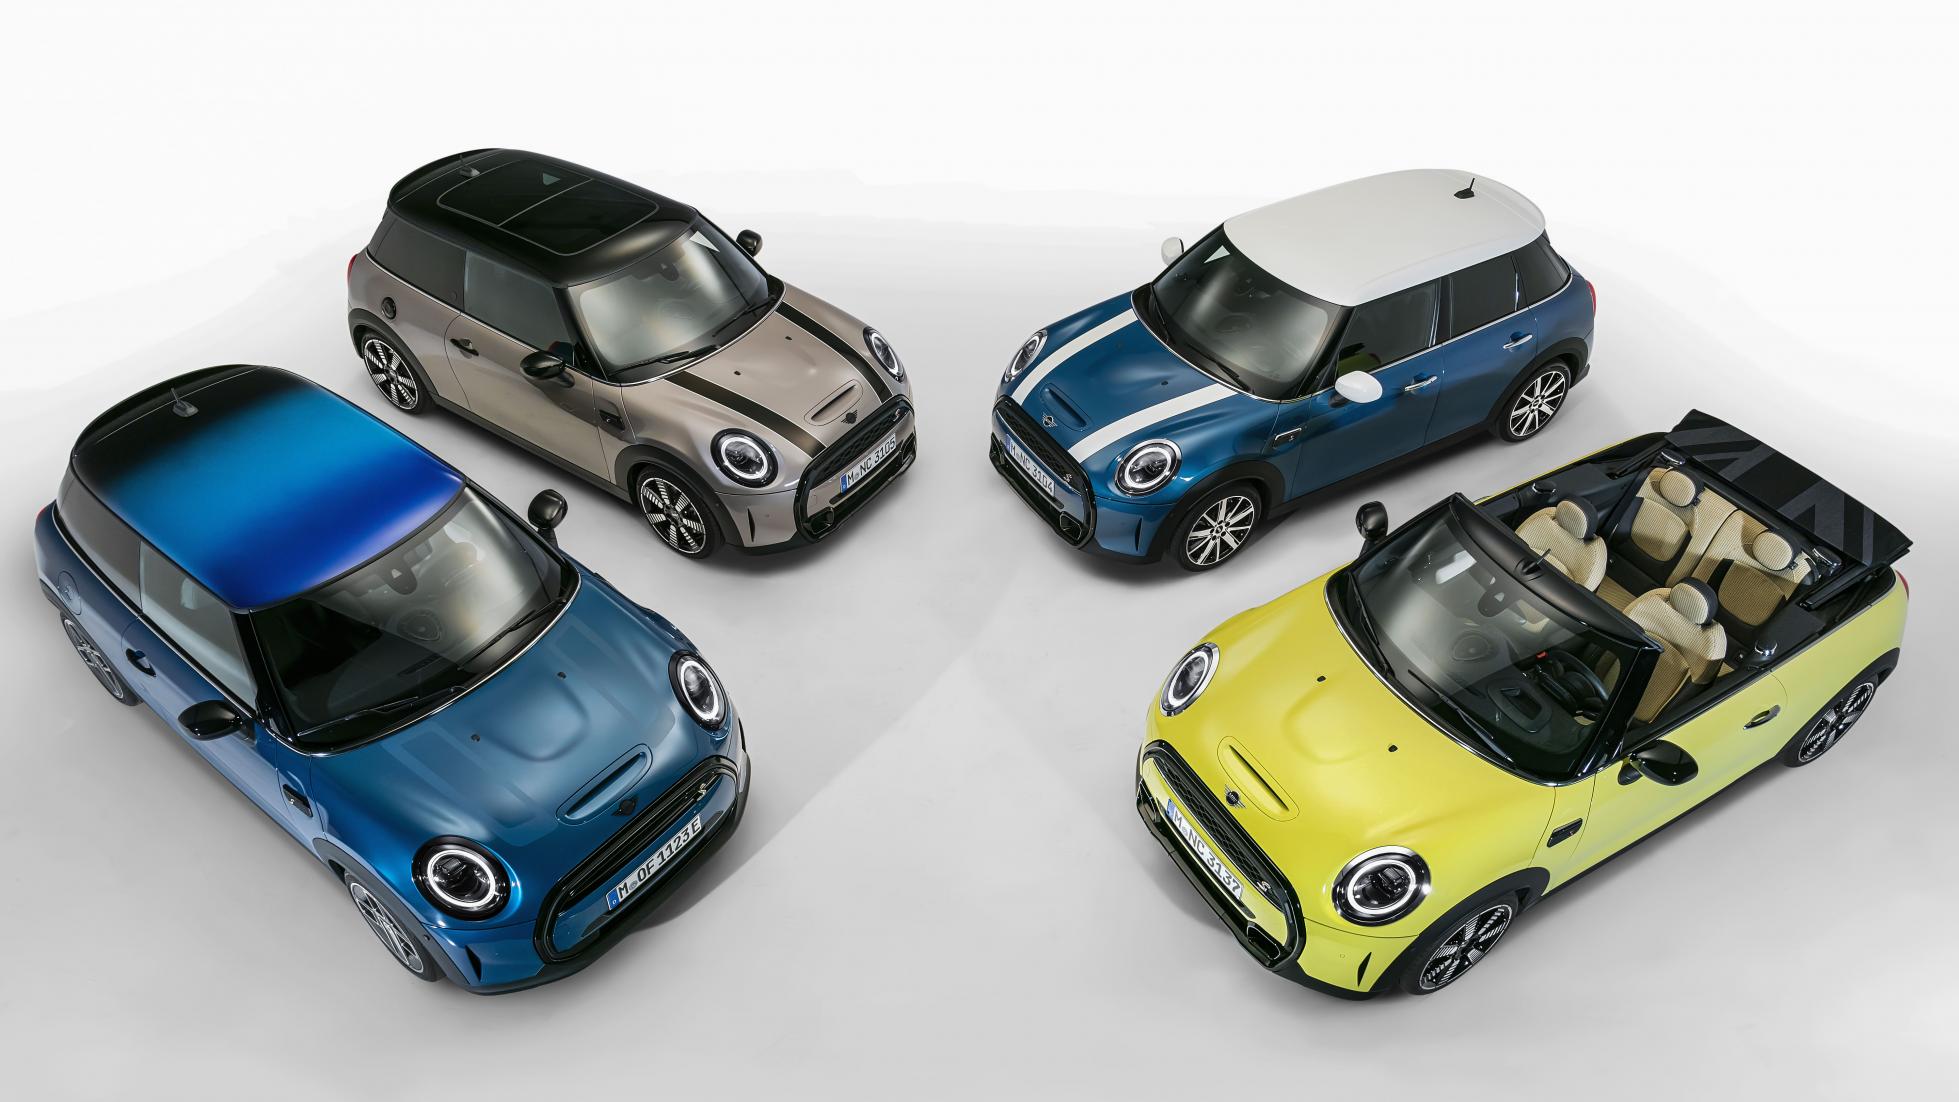 topgear does the new mini look better or worse than before